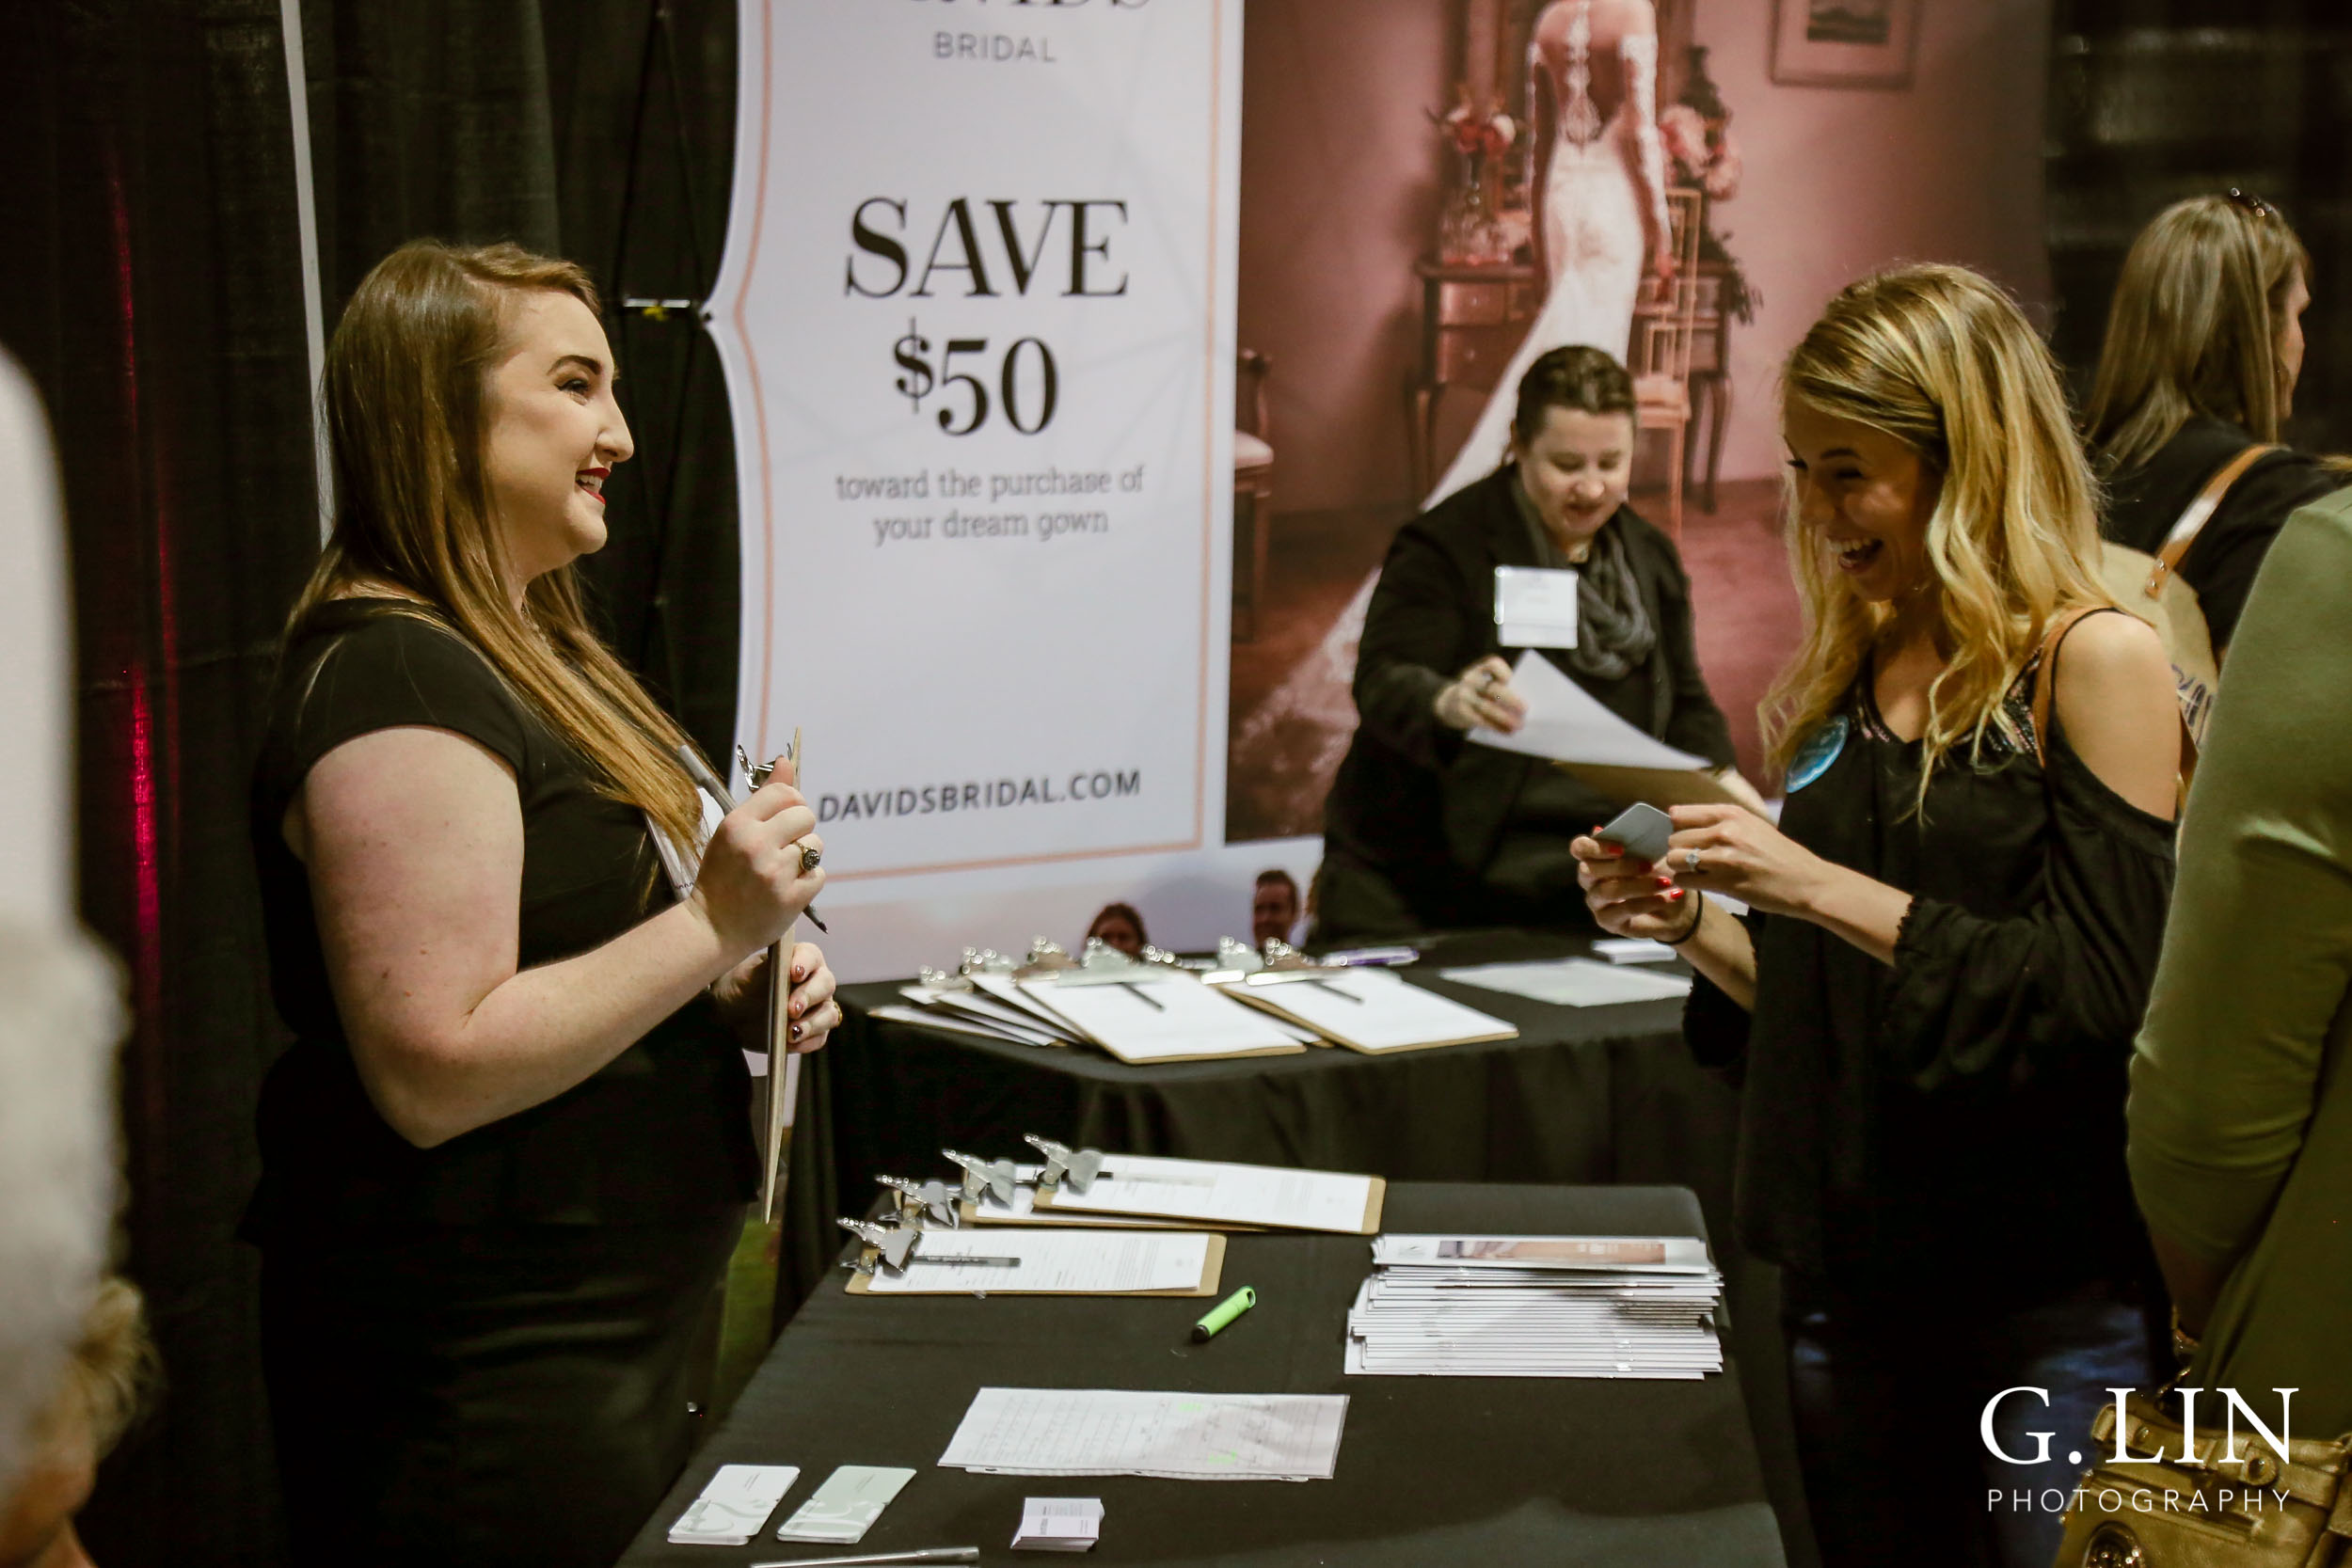 Raleigh Event Photographer | G. Lin Photography | Vendor and bride chatting at booth